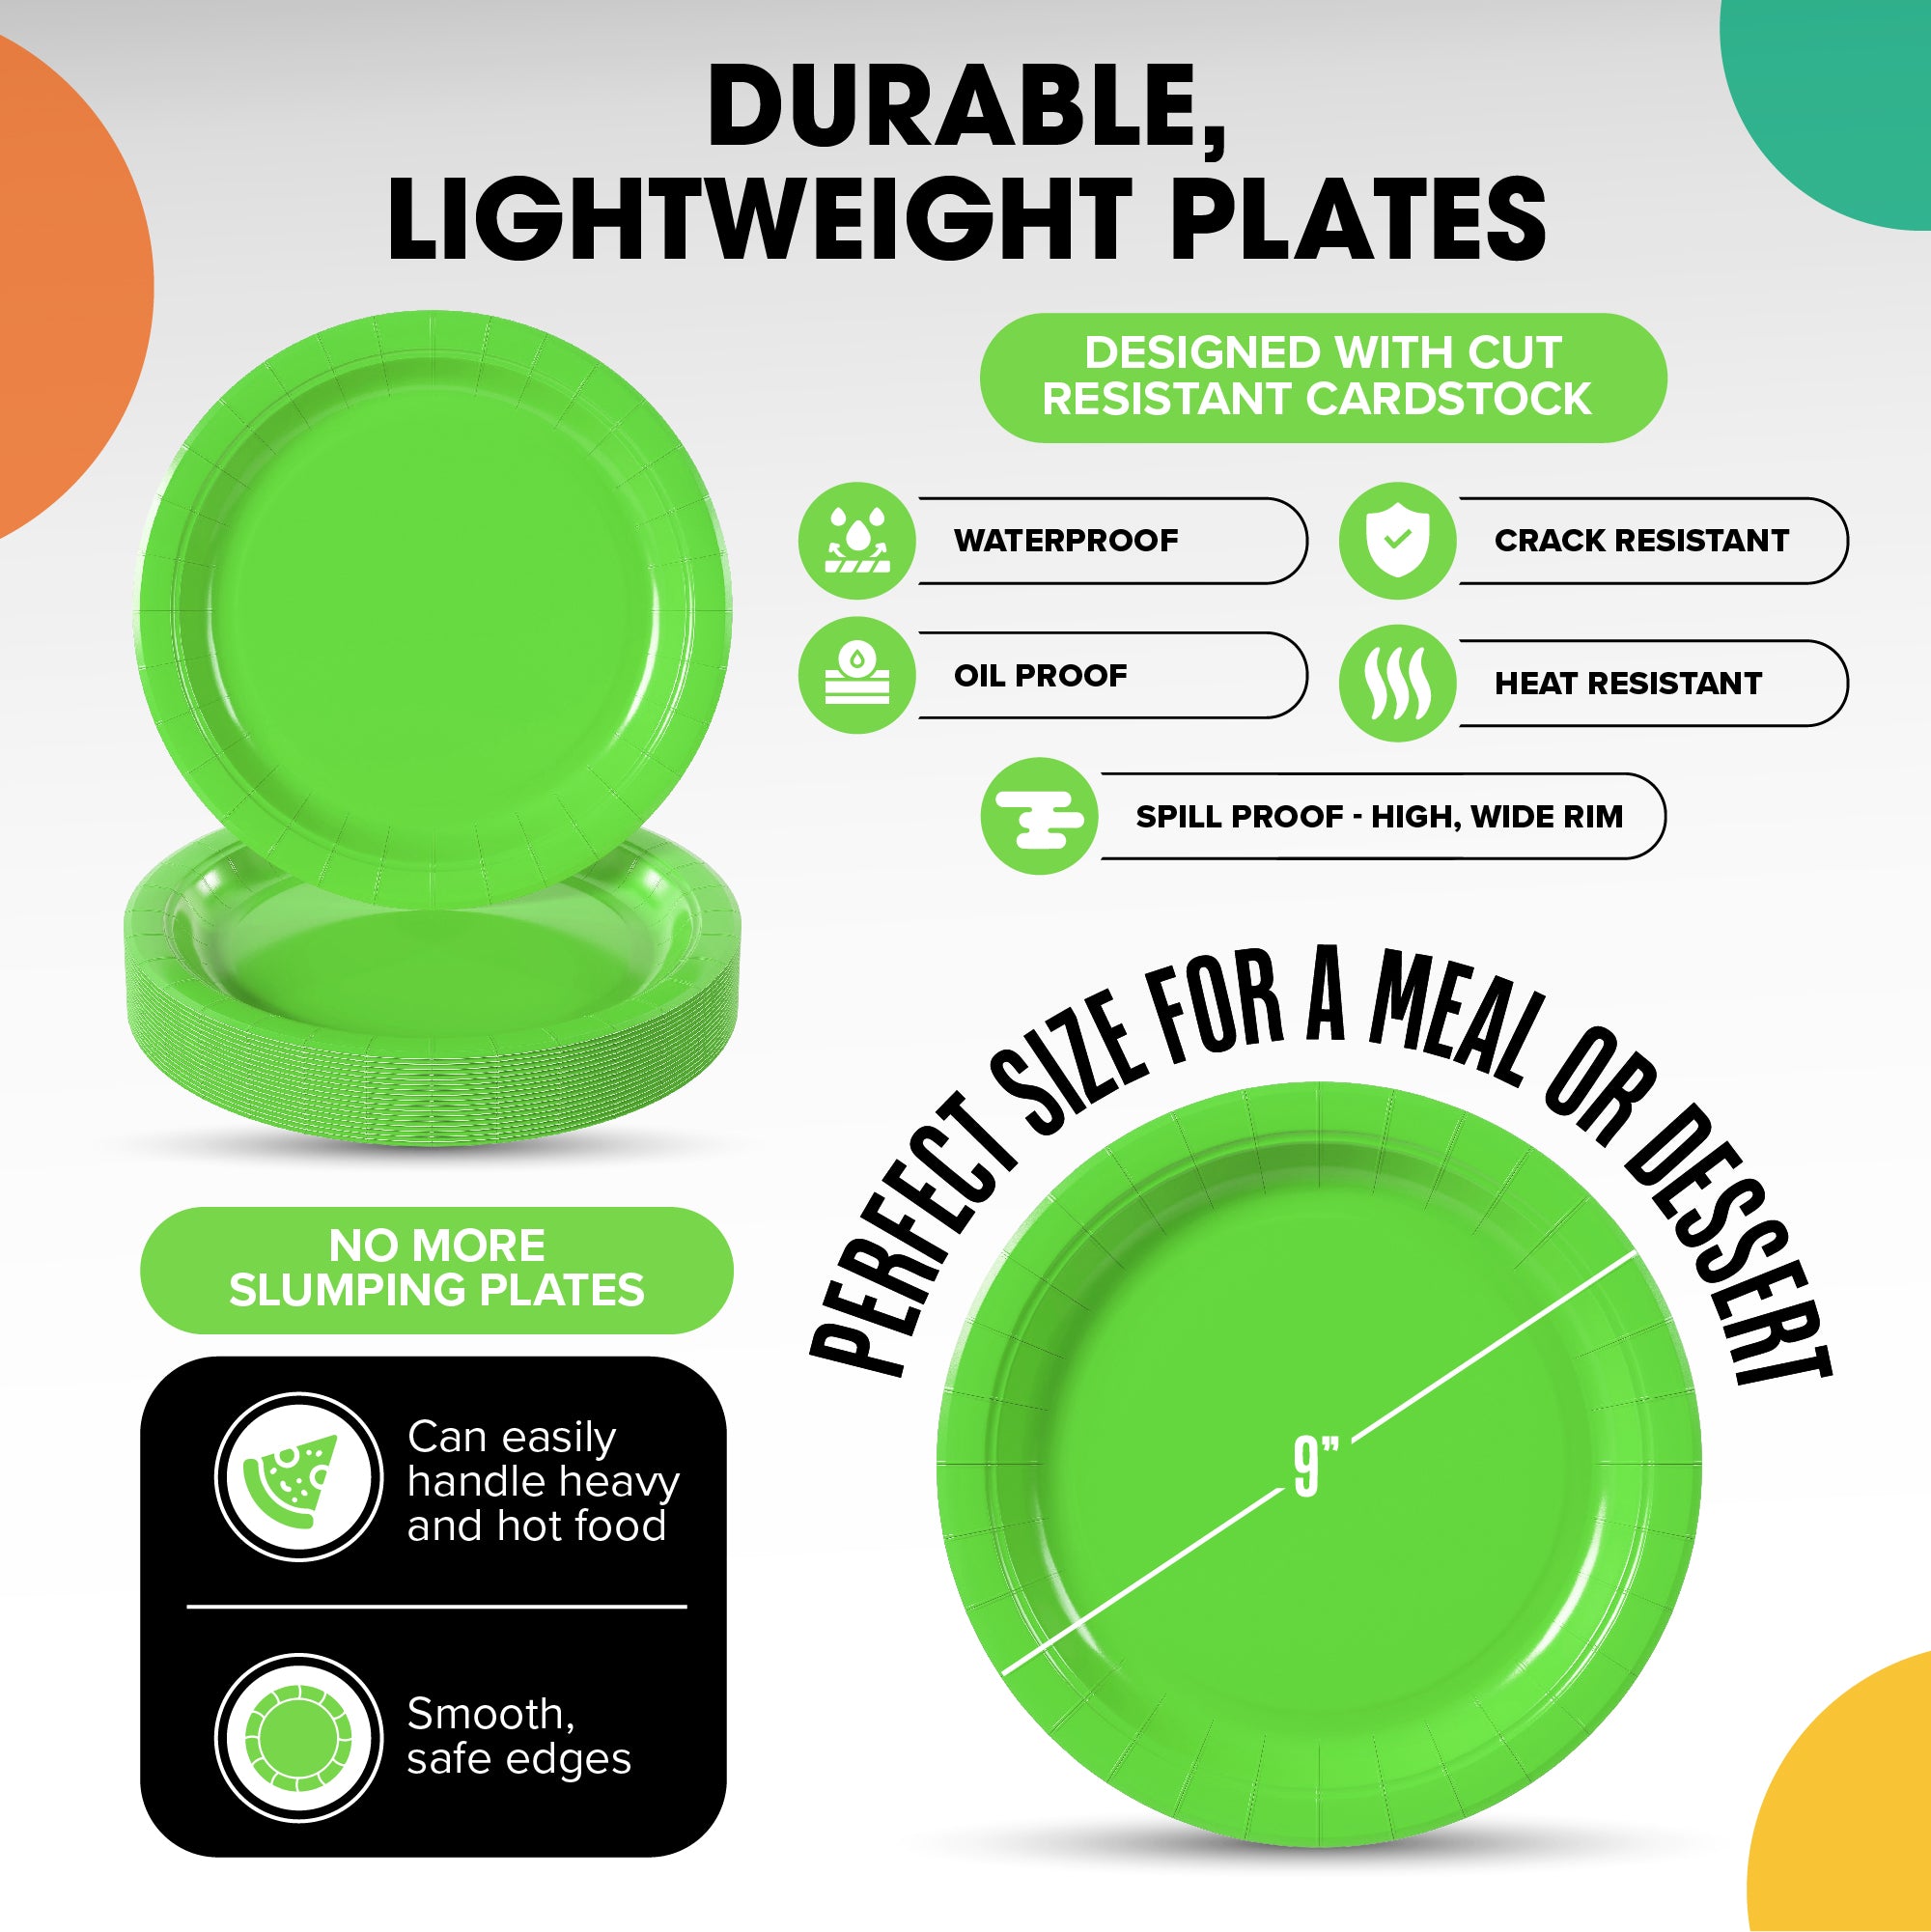 9 In. Lime Paper Plates - 500 Ct.